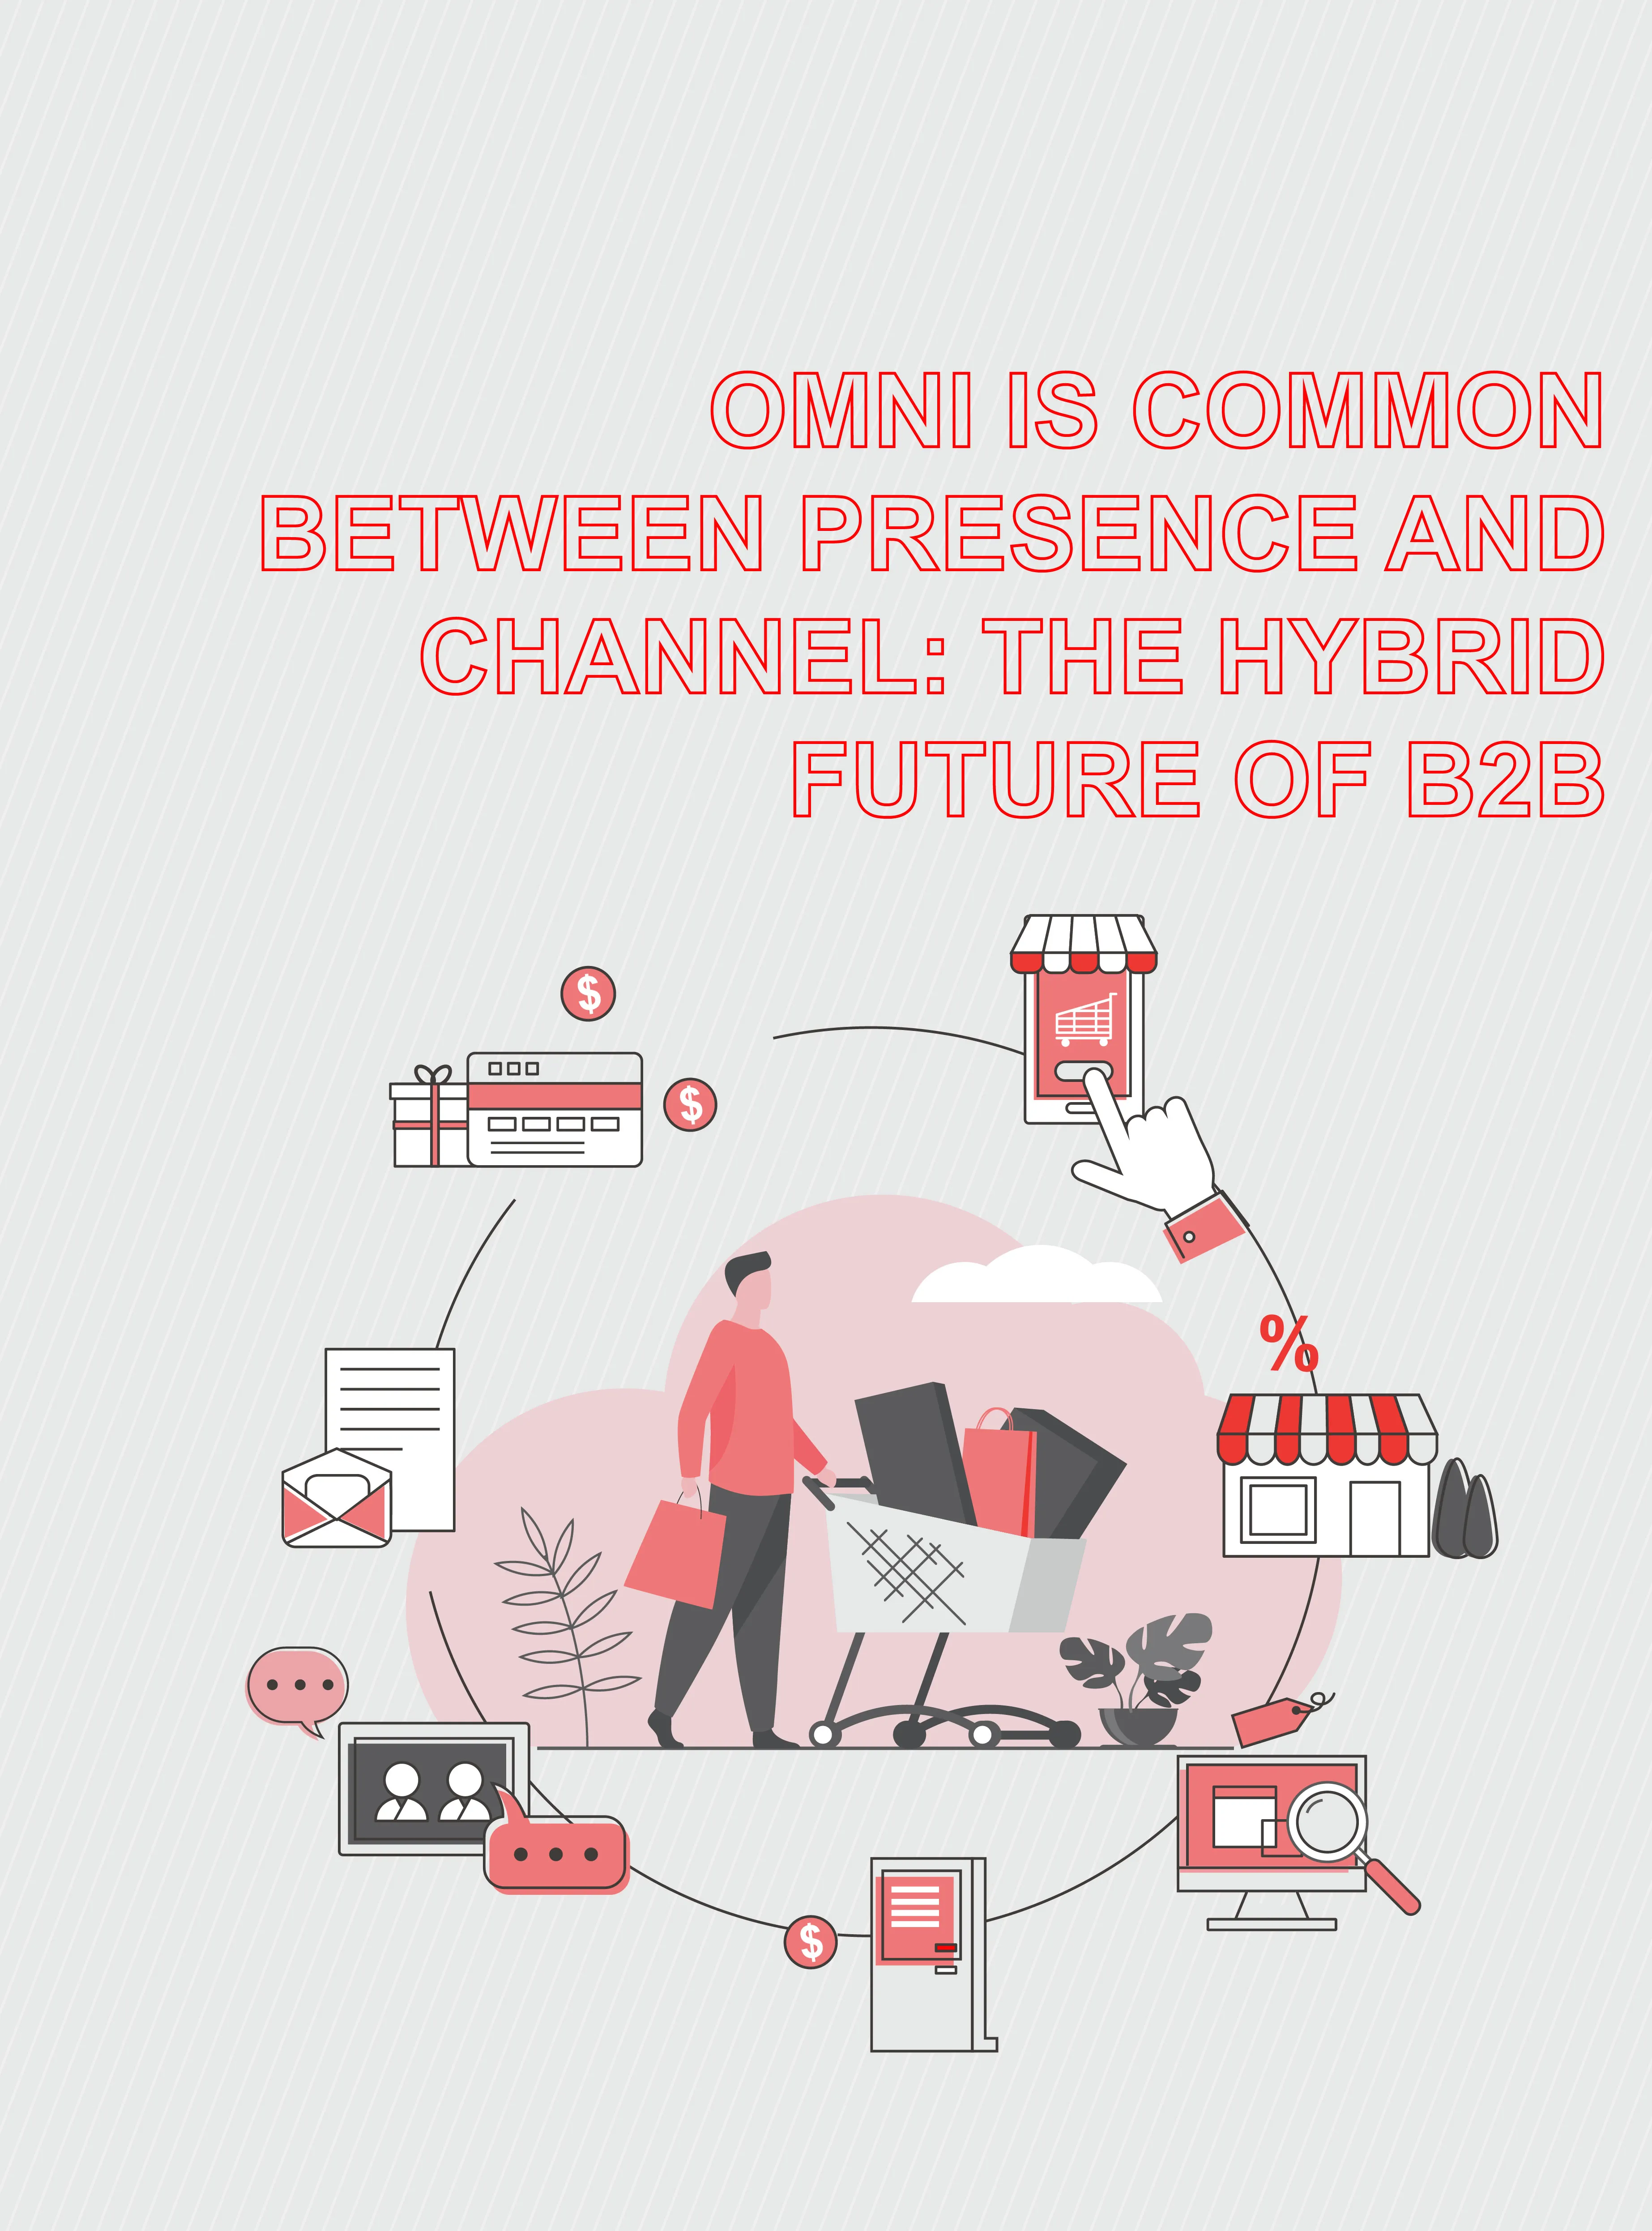 Omni is common between presence and channel-the hybrid future of b2b